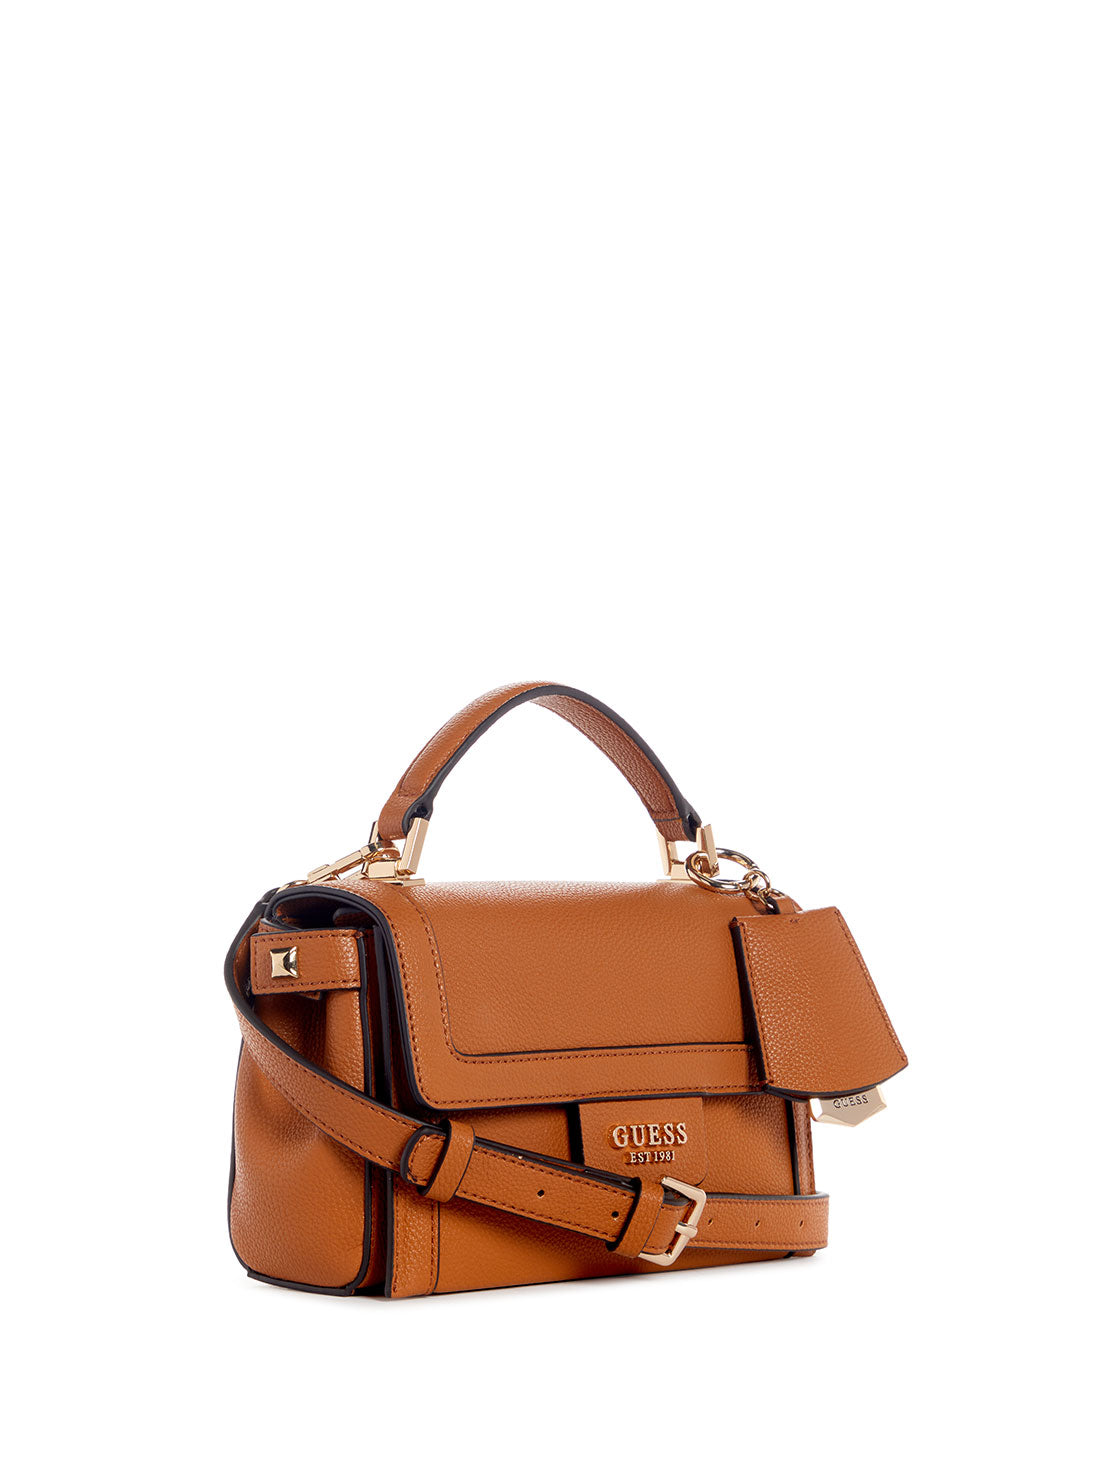 GUESS Women's Cognac Angy Crossbody Bag VG897178 Angle View